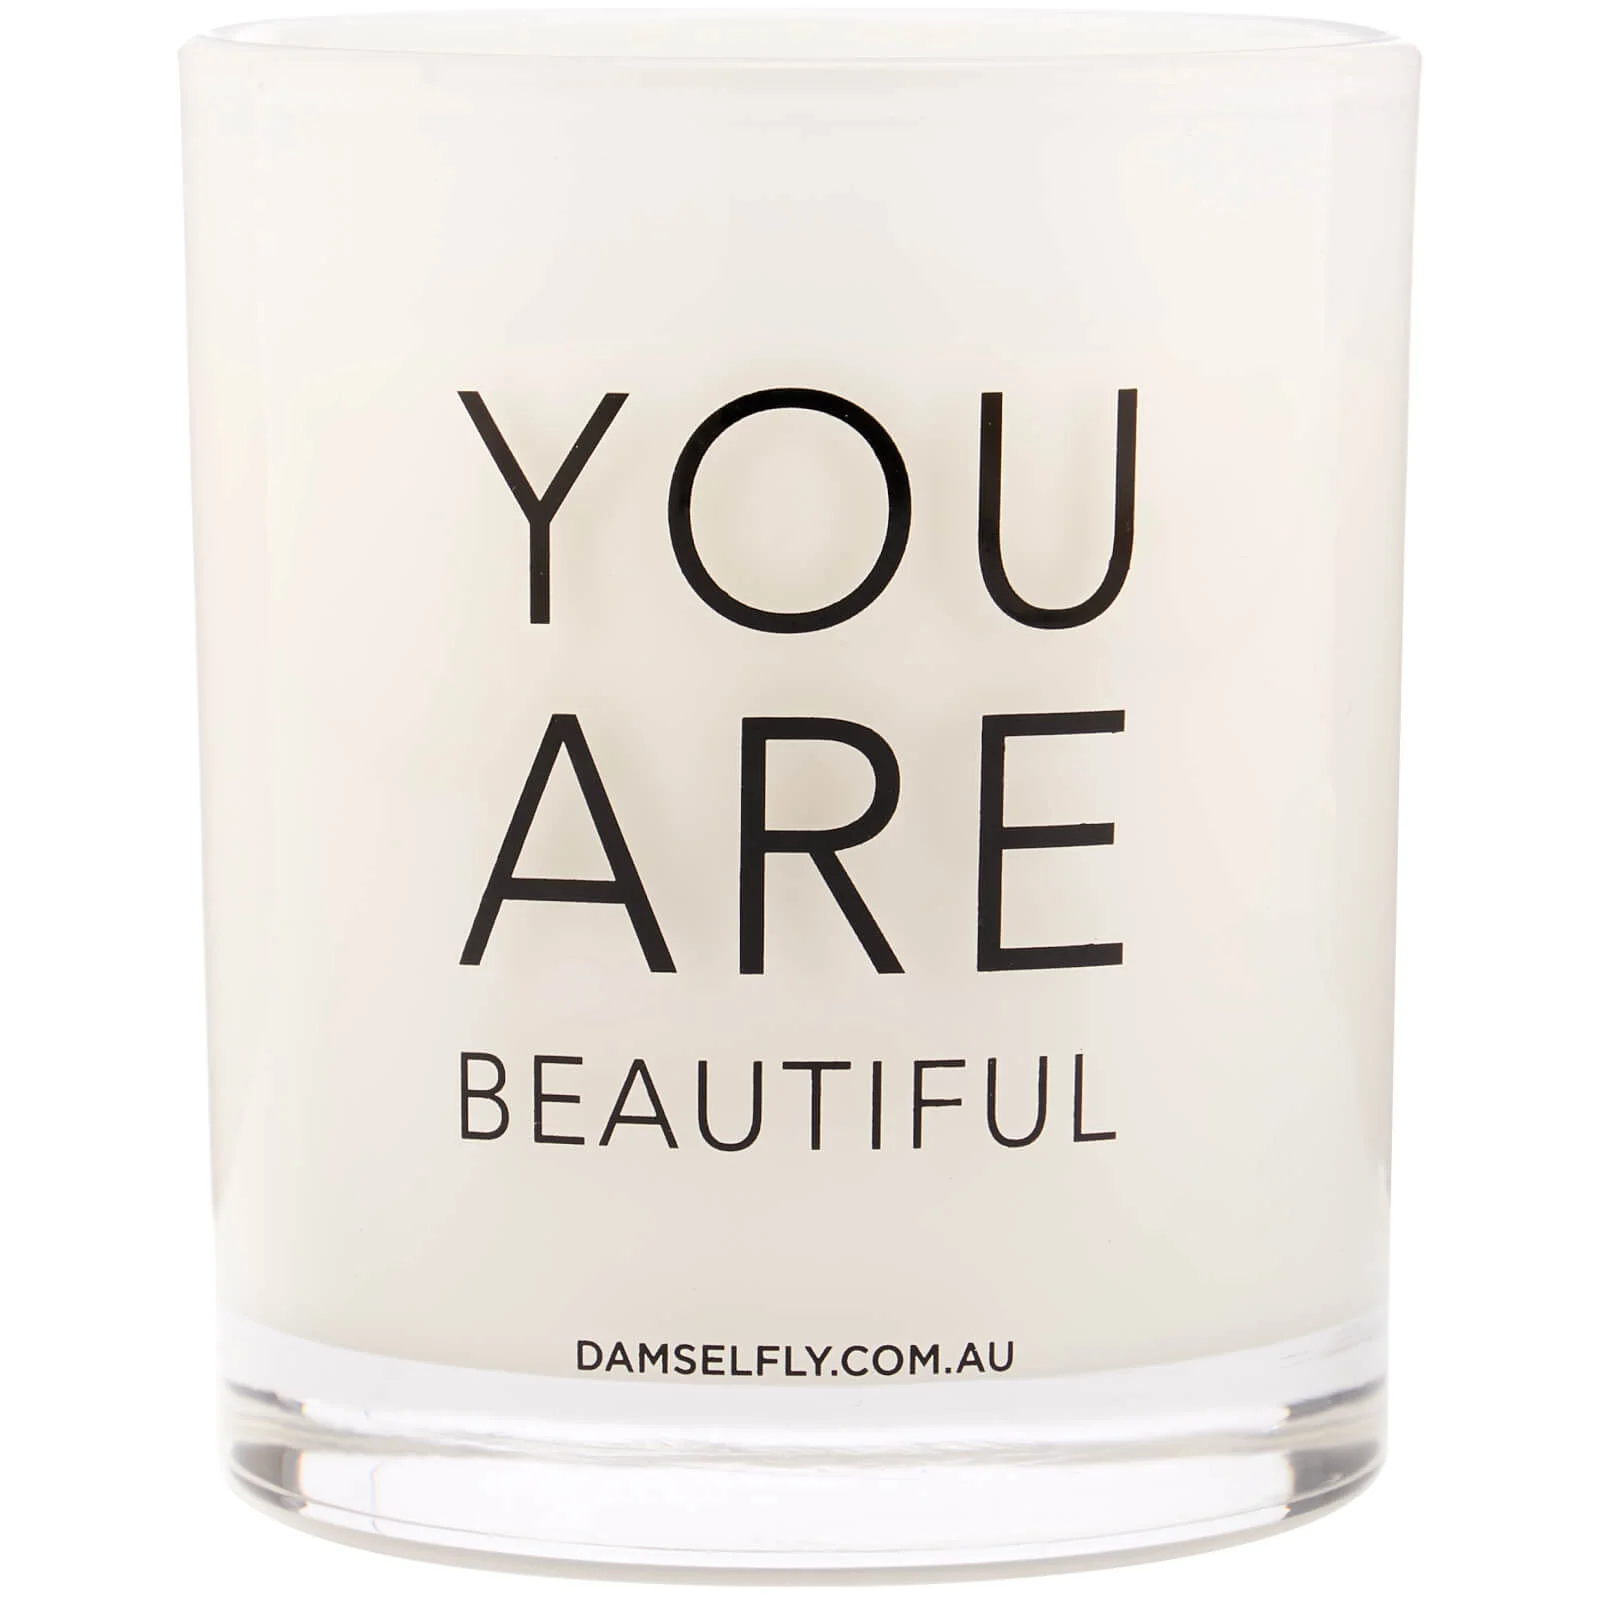 Damselfly You Are Beautiful Candle 300g Image 1